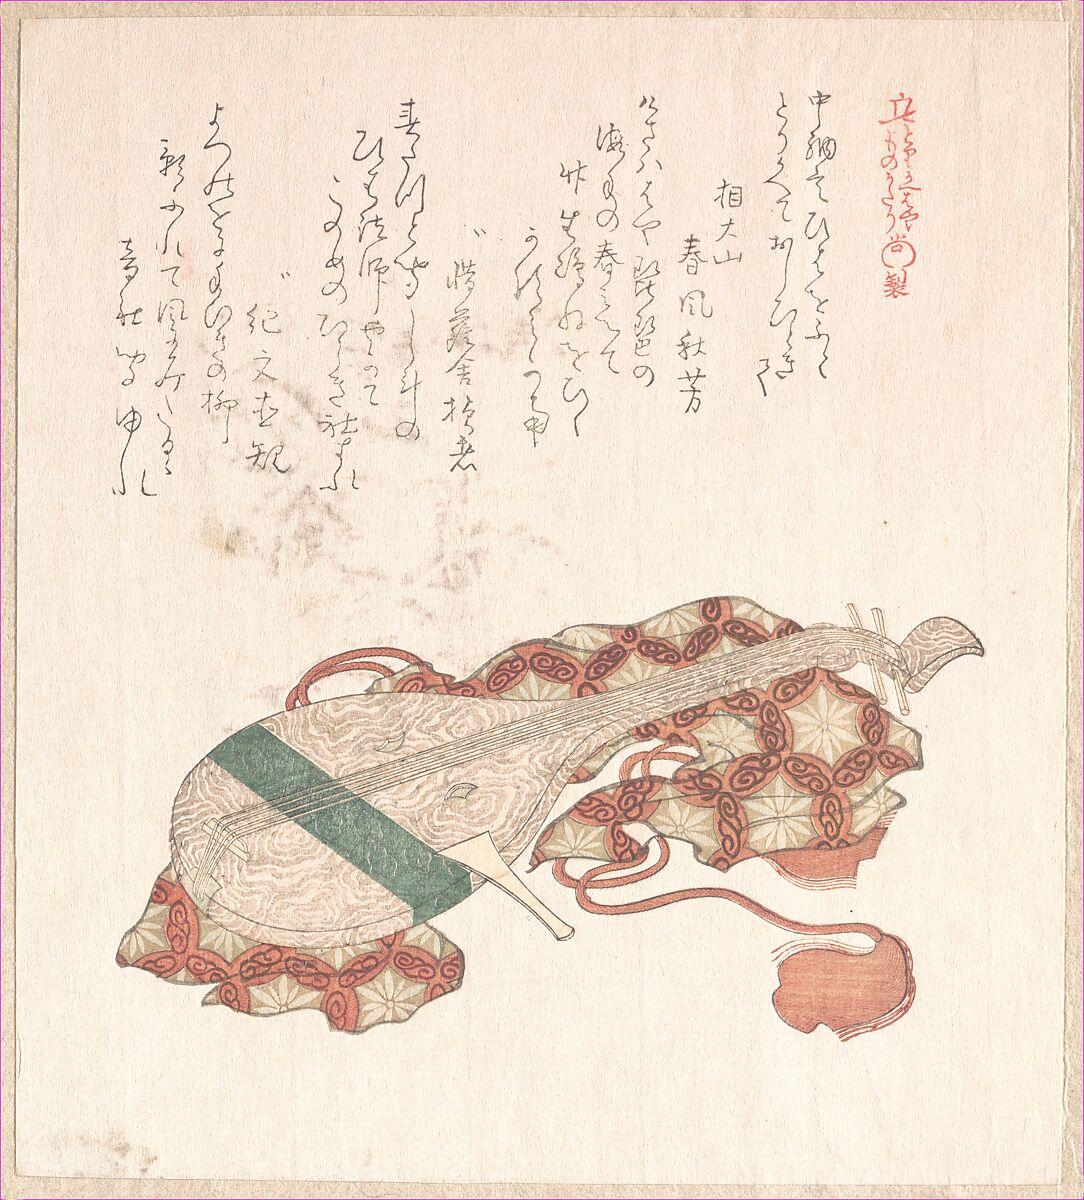 Biwa (Japanese Lute) with Cover, Kubo Shunman (Japanese, 1757–1820), Woodblock print (surimono); ink and color on paper, Japan 